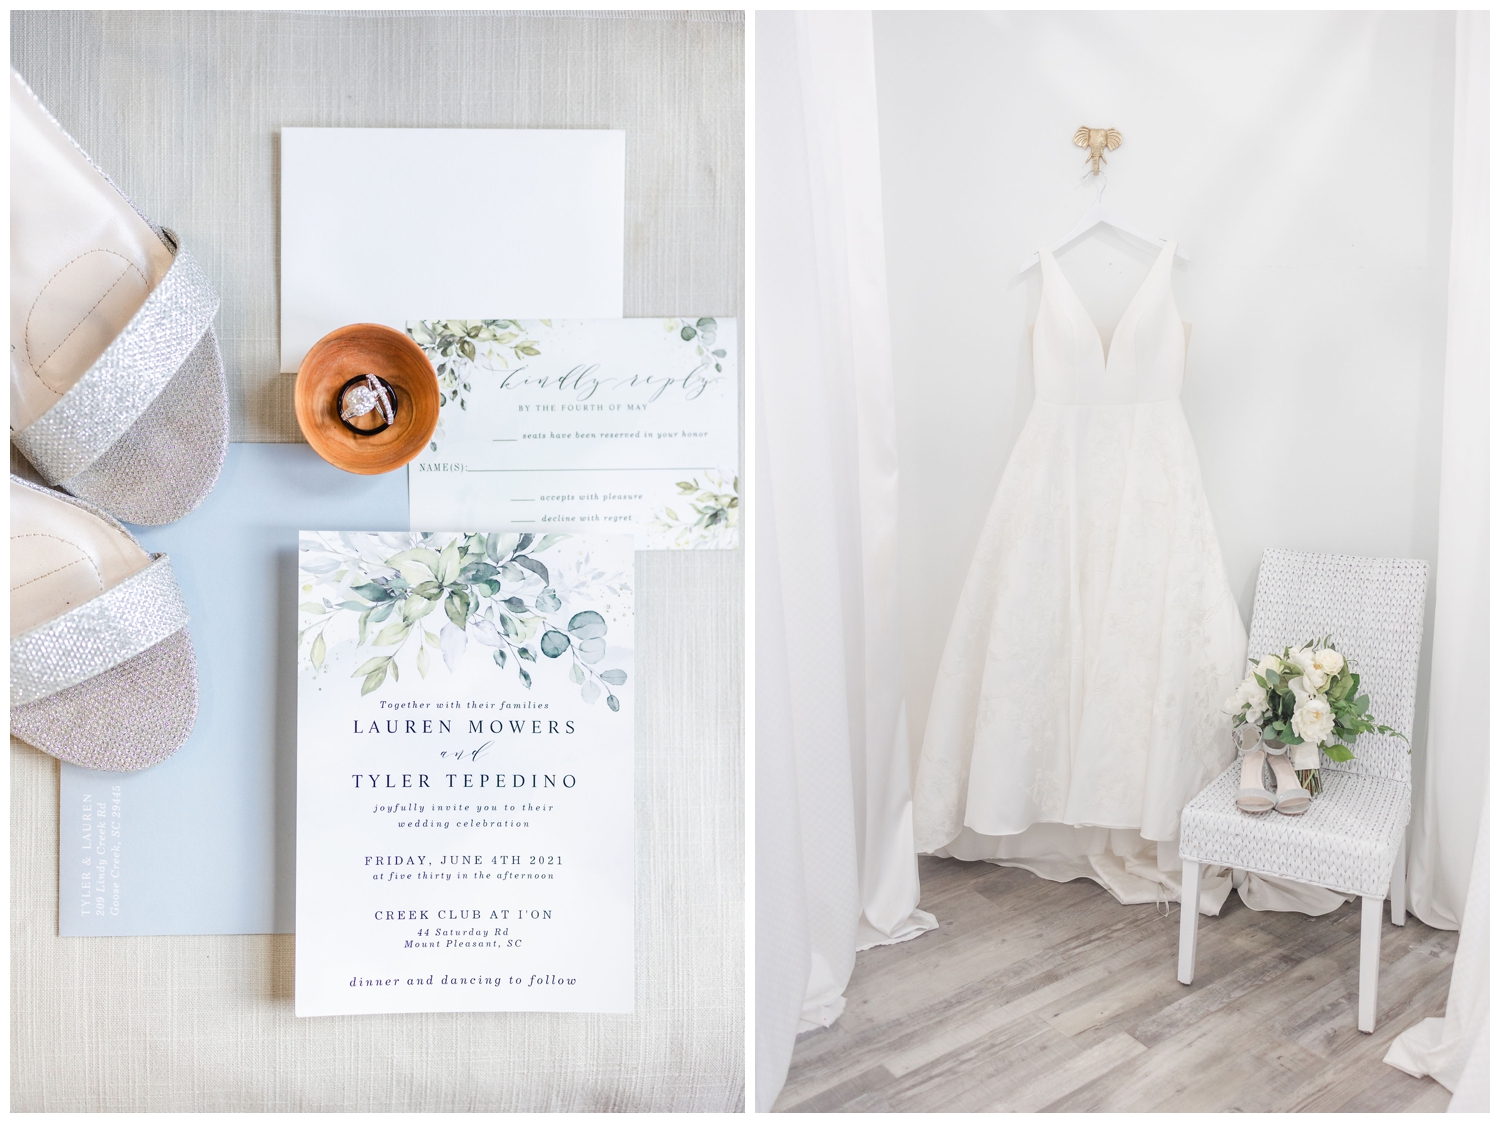 white invitation suite and wedding gown handing